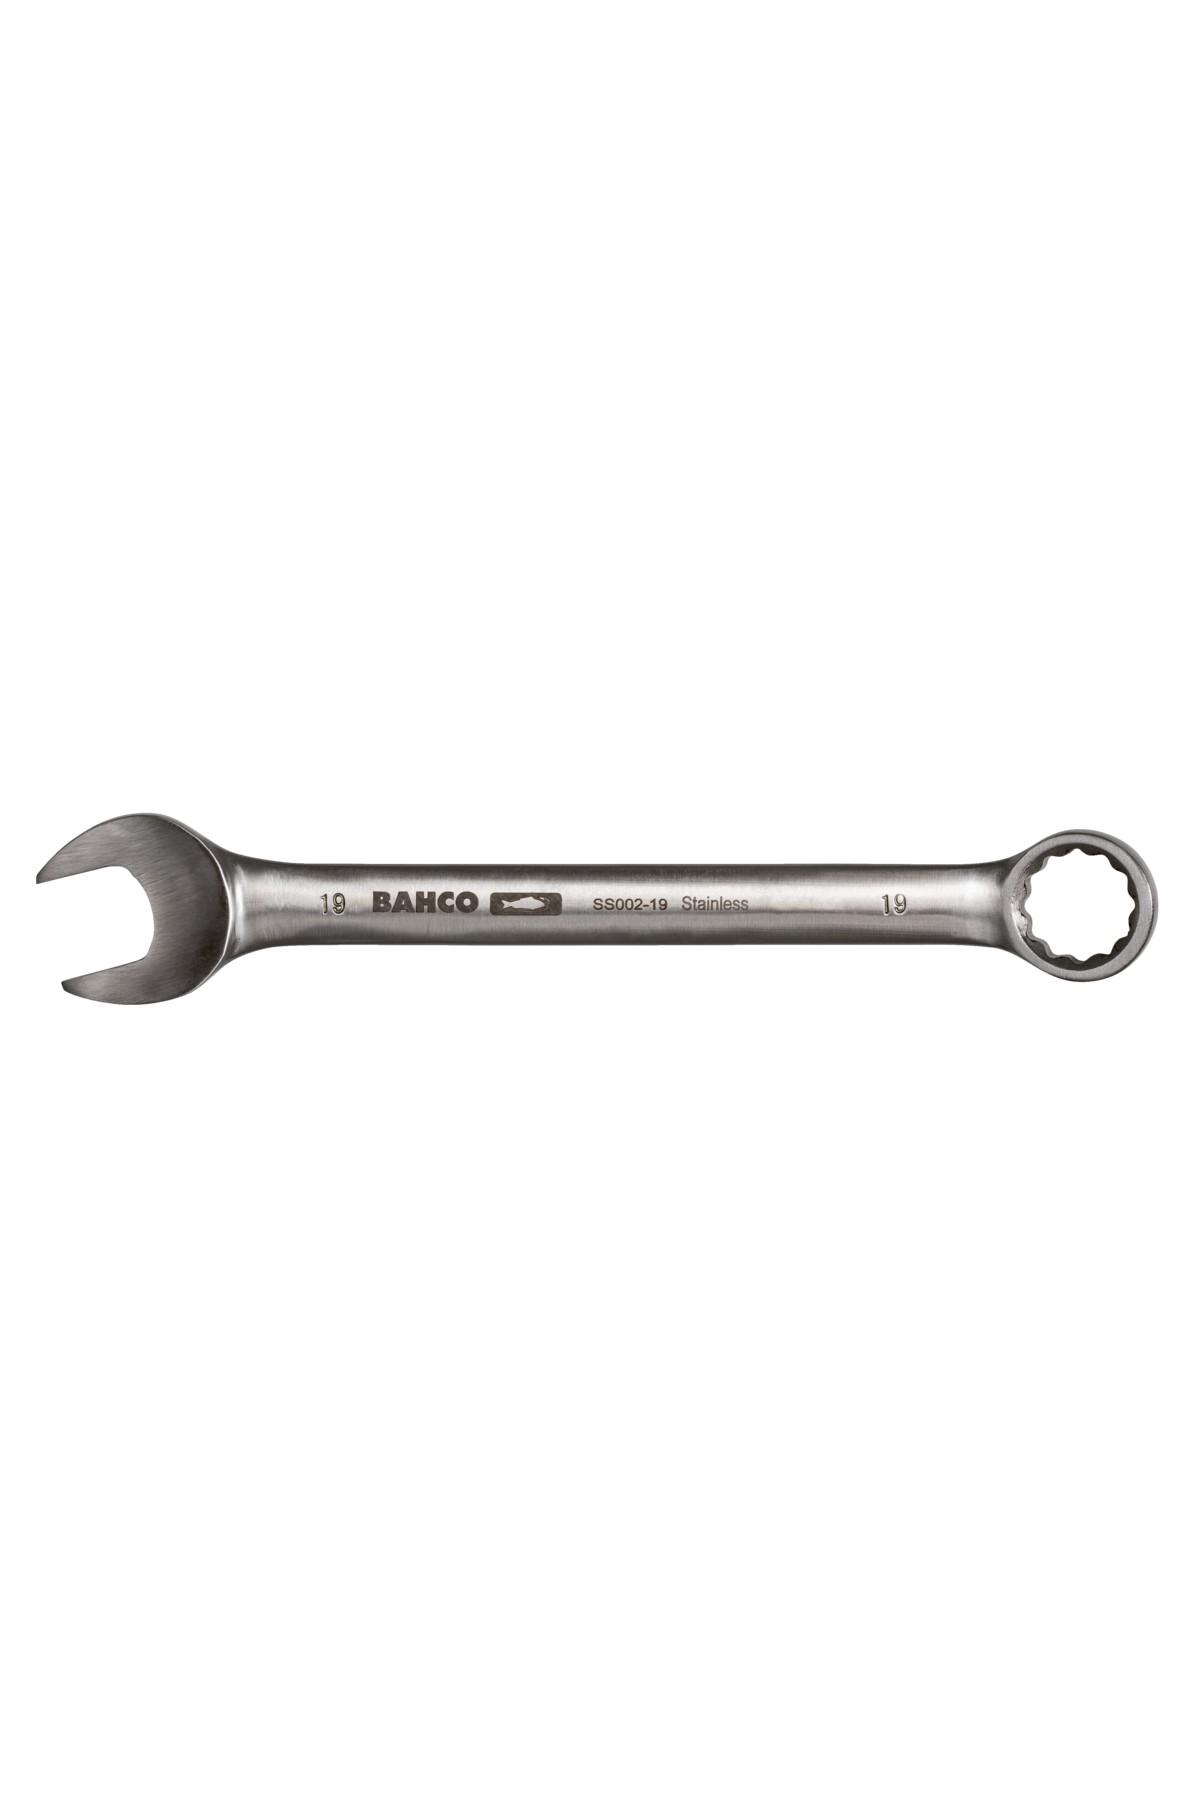 Ring spanner stainless 13mm